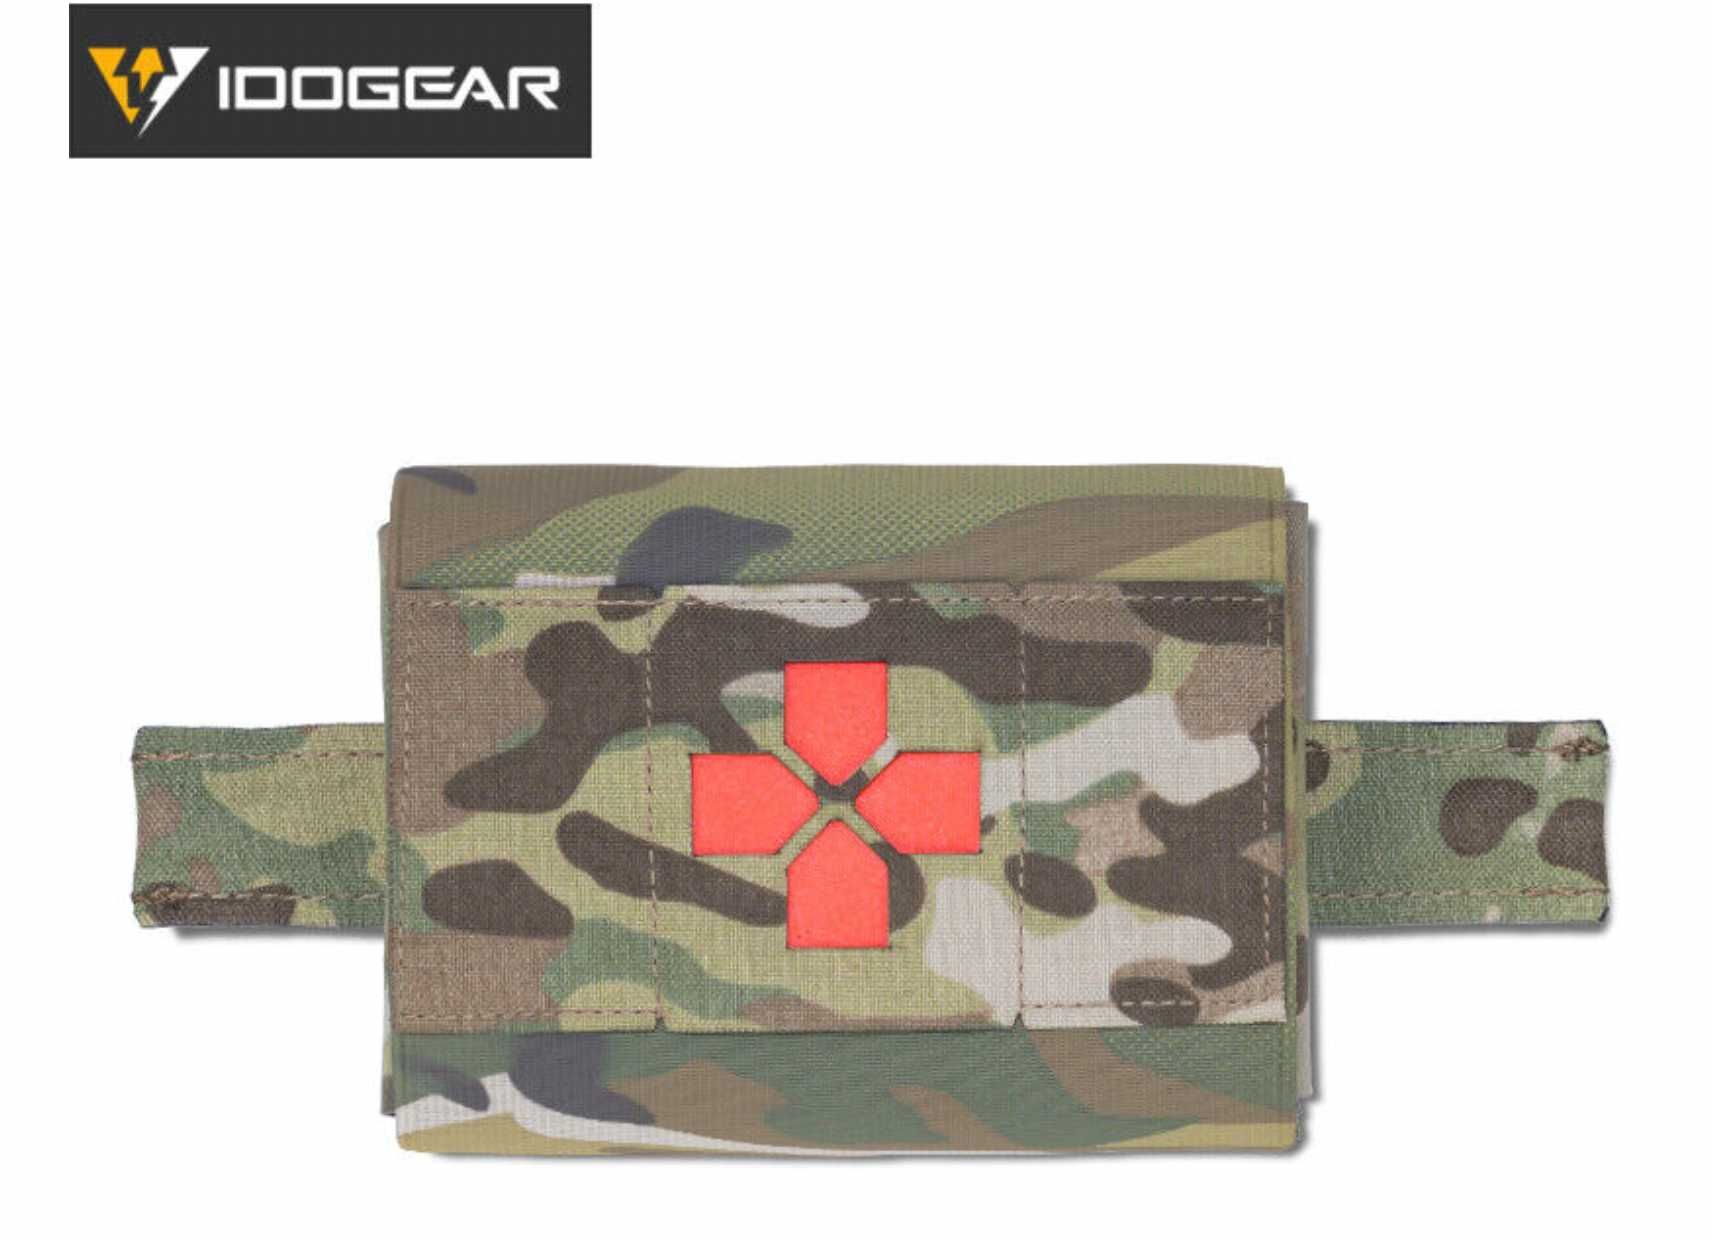 IDOGEAR IG-BG3571-MC MICRO Blow-out Med Kit Pouch